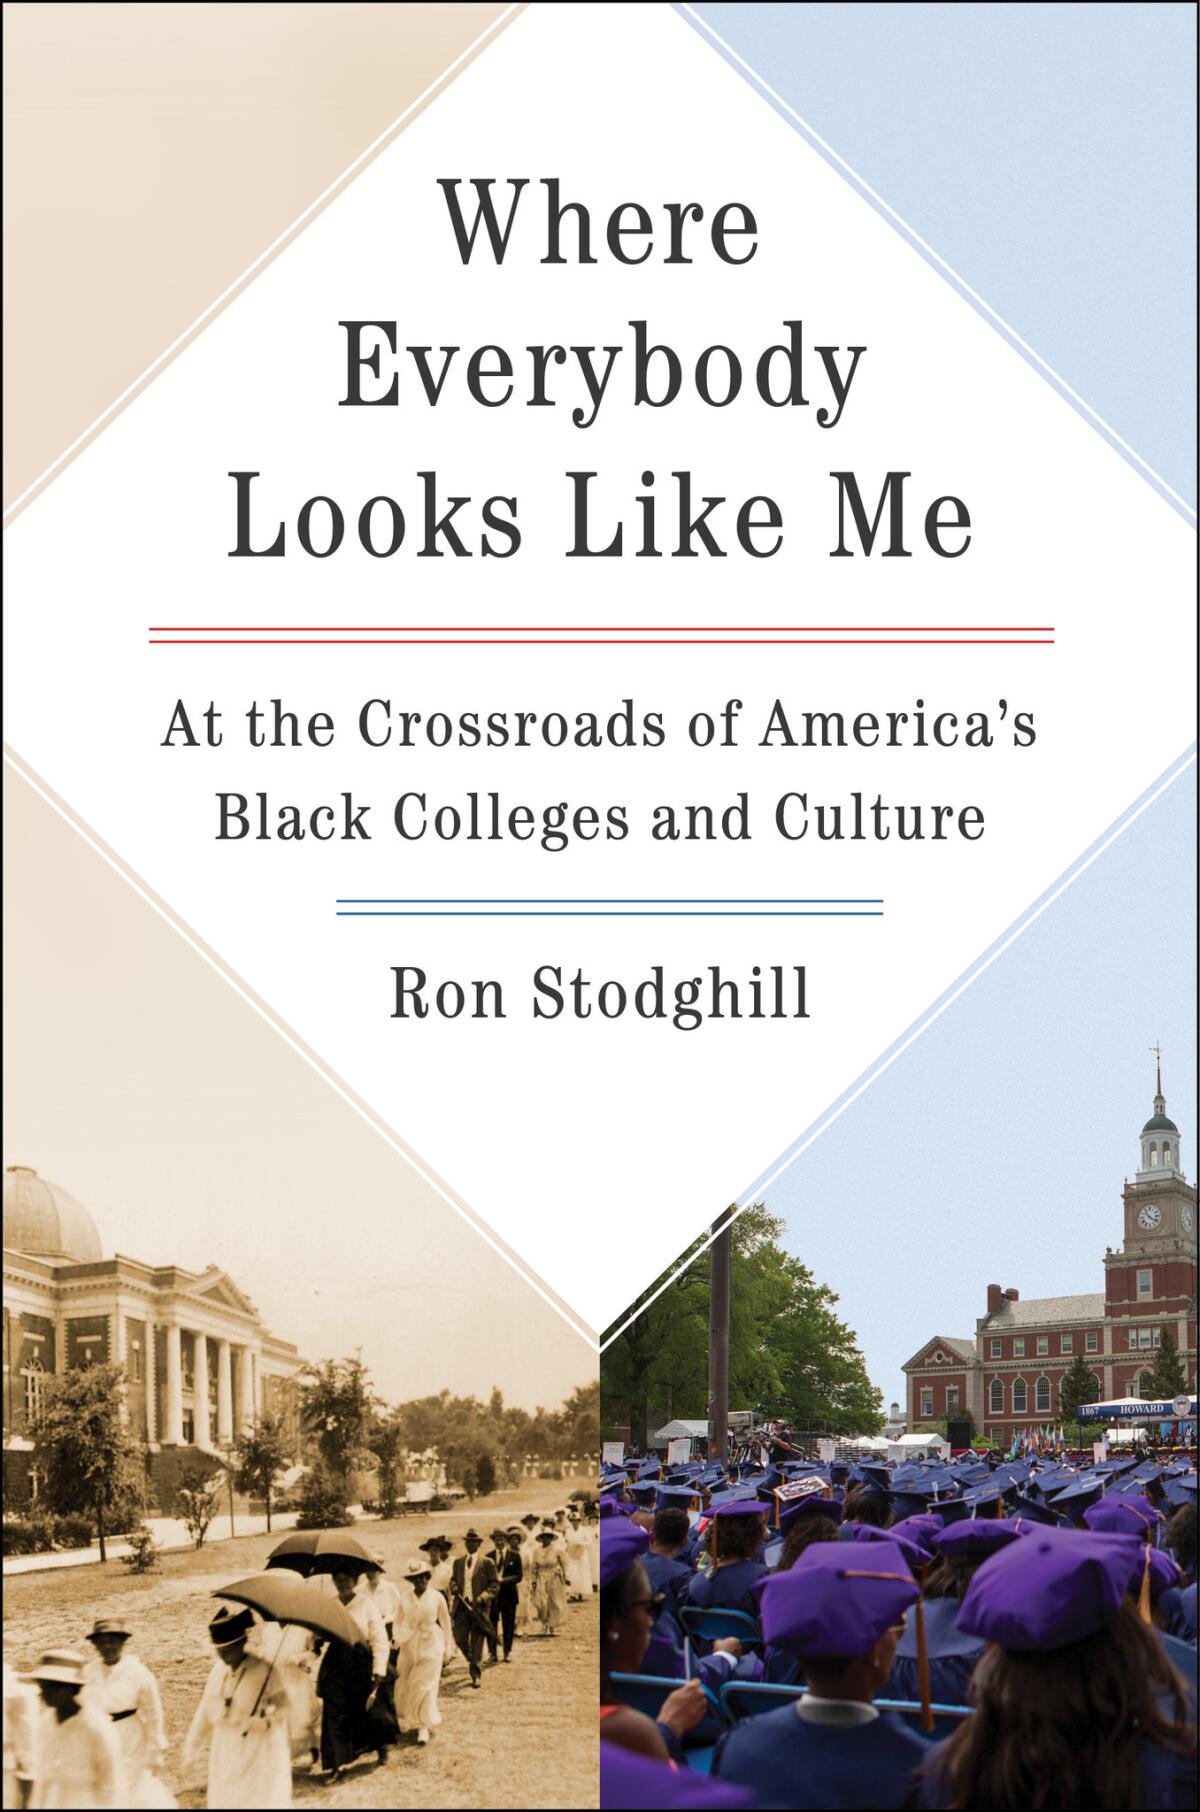 "Where Everybody Looks Like Me: At the Crossroads of America’s Black Colleges and Culture" by Ron Stodghill